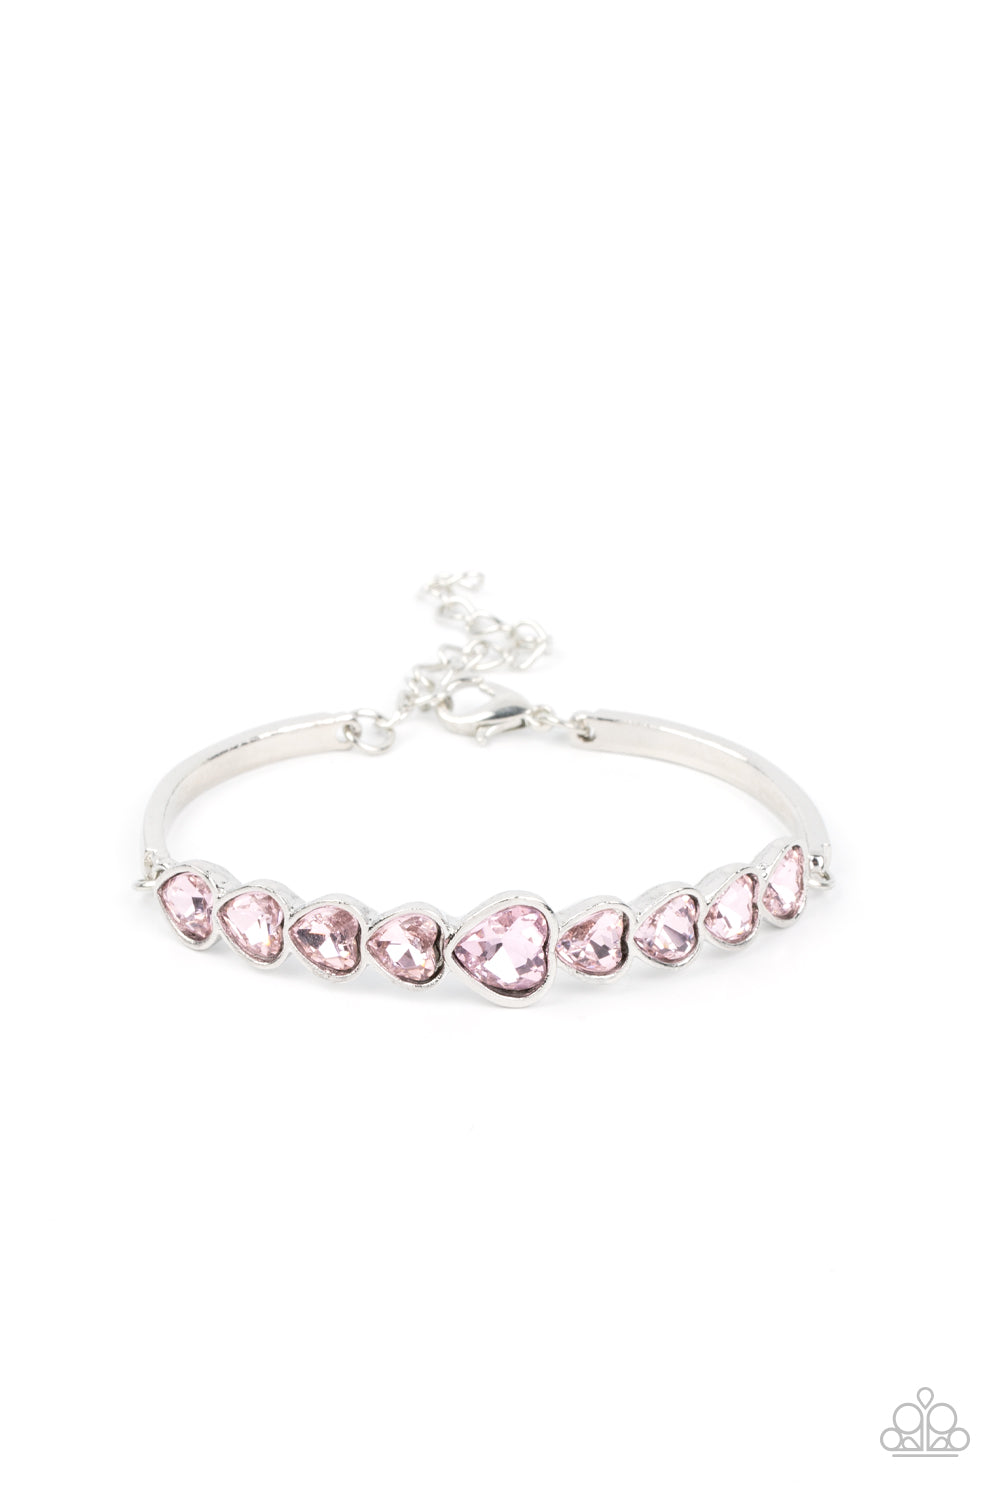 Lusty Luster Pink Bracelet Paparazzi Accessories. Get Free Shipping. #P9WH-PKXX-298XX